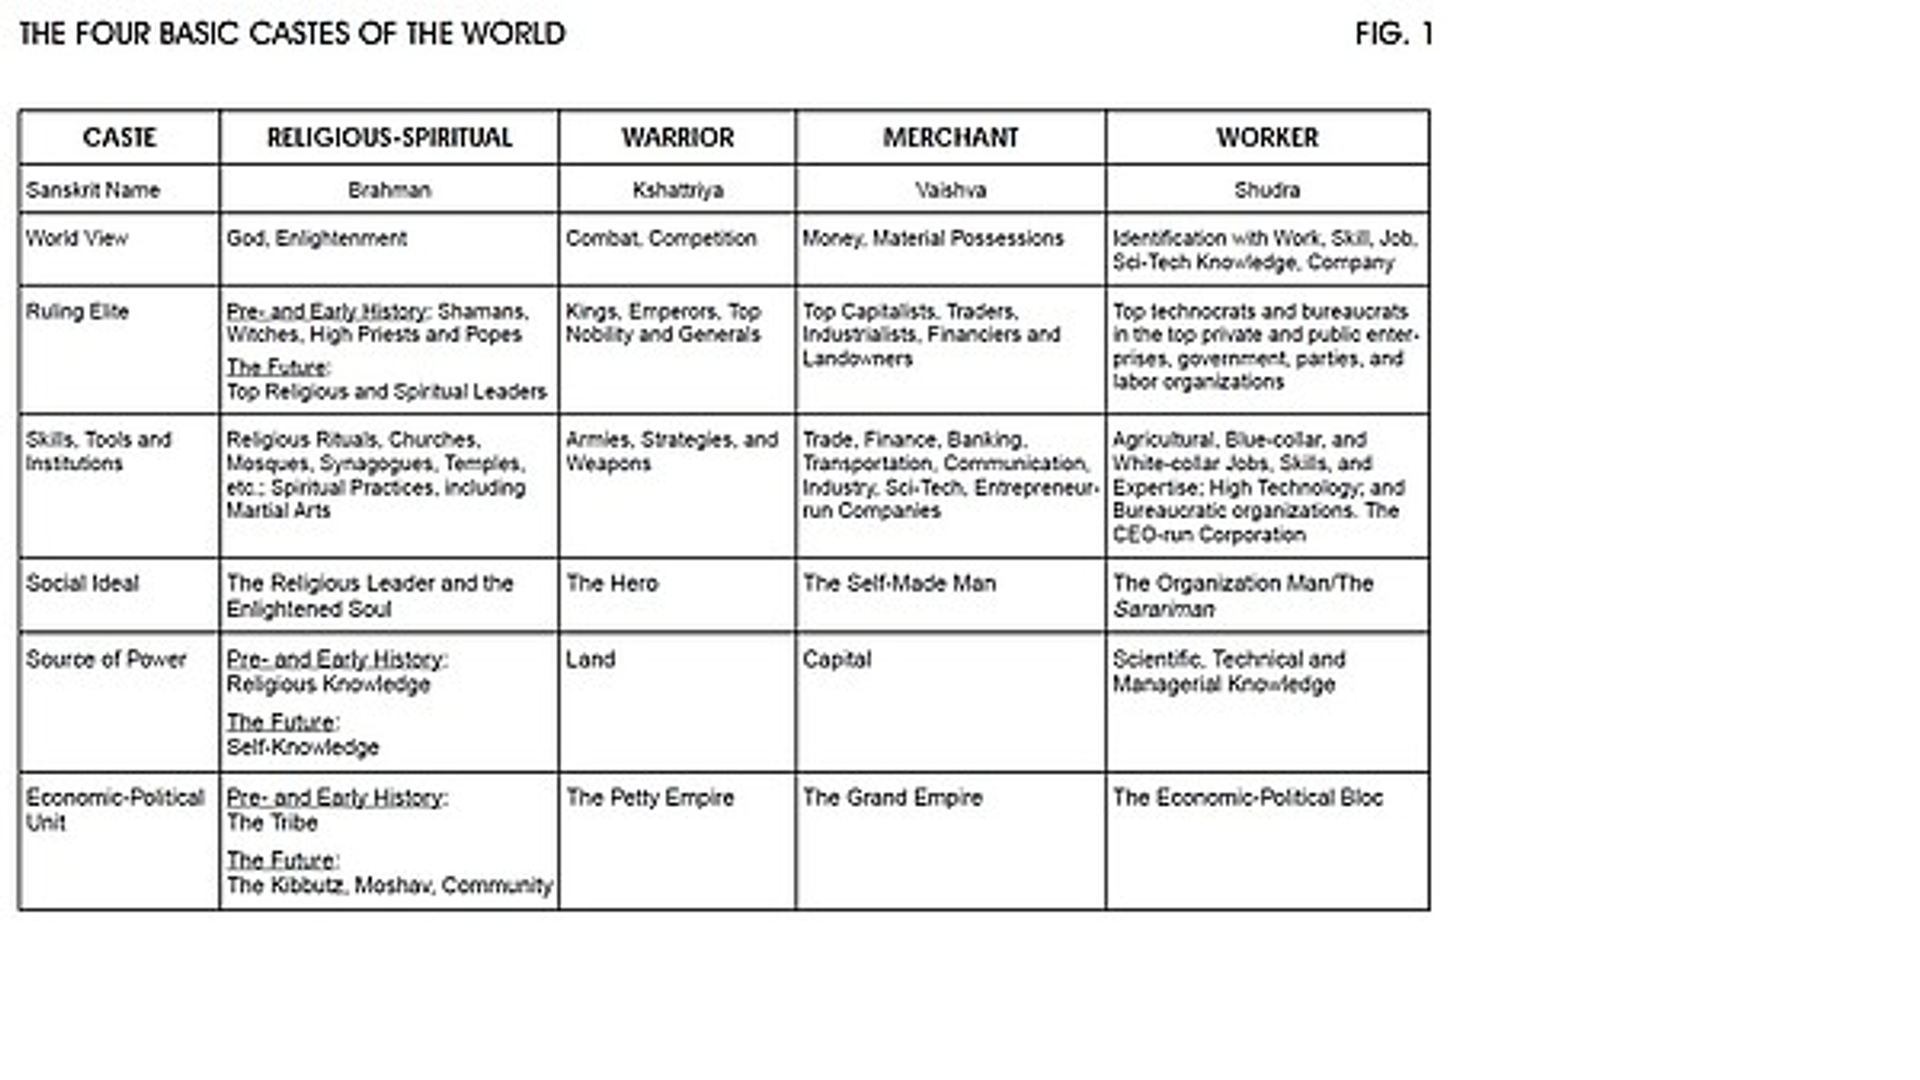 RTEmagicC_TABLE_1_-_FOUR_BASIC_CASTES_OF_THE_WORLD_1_.jpg